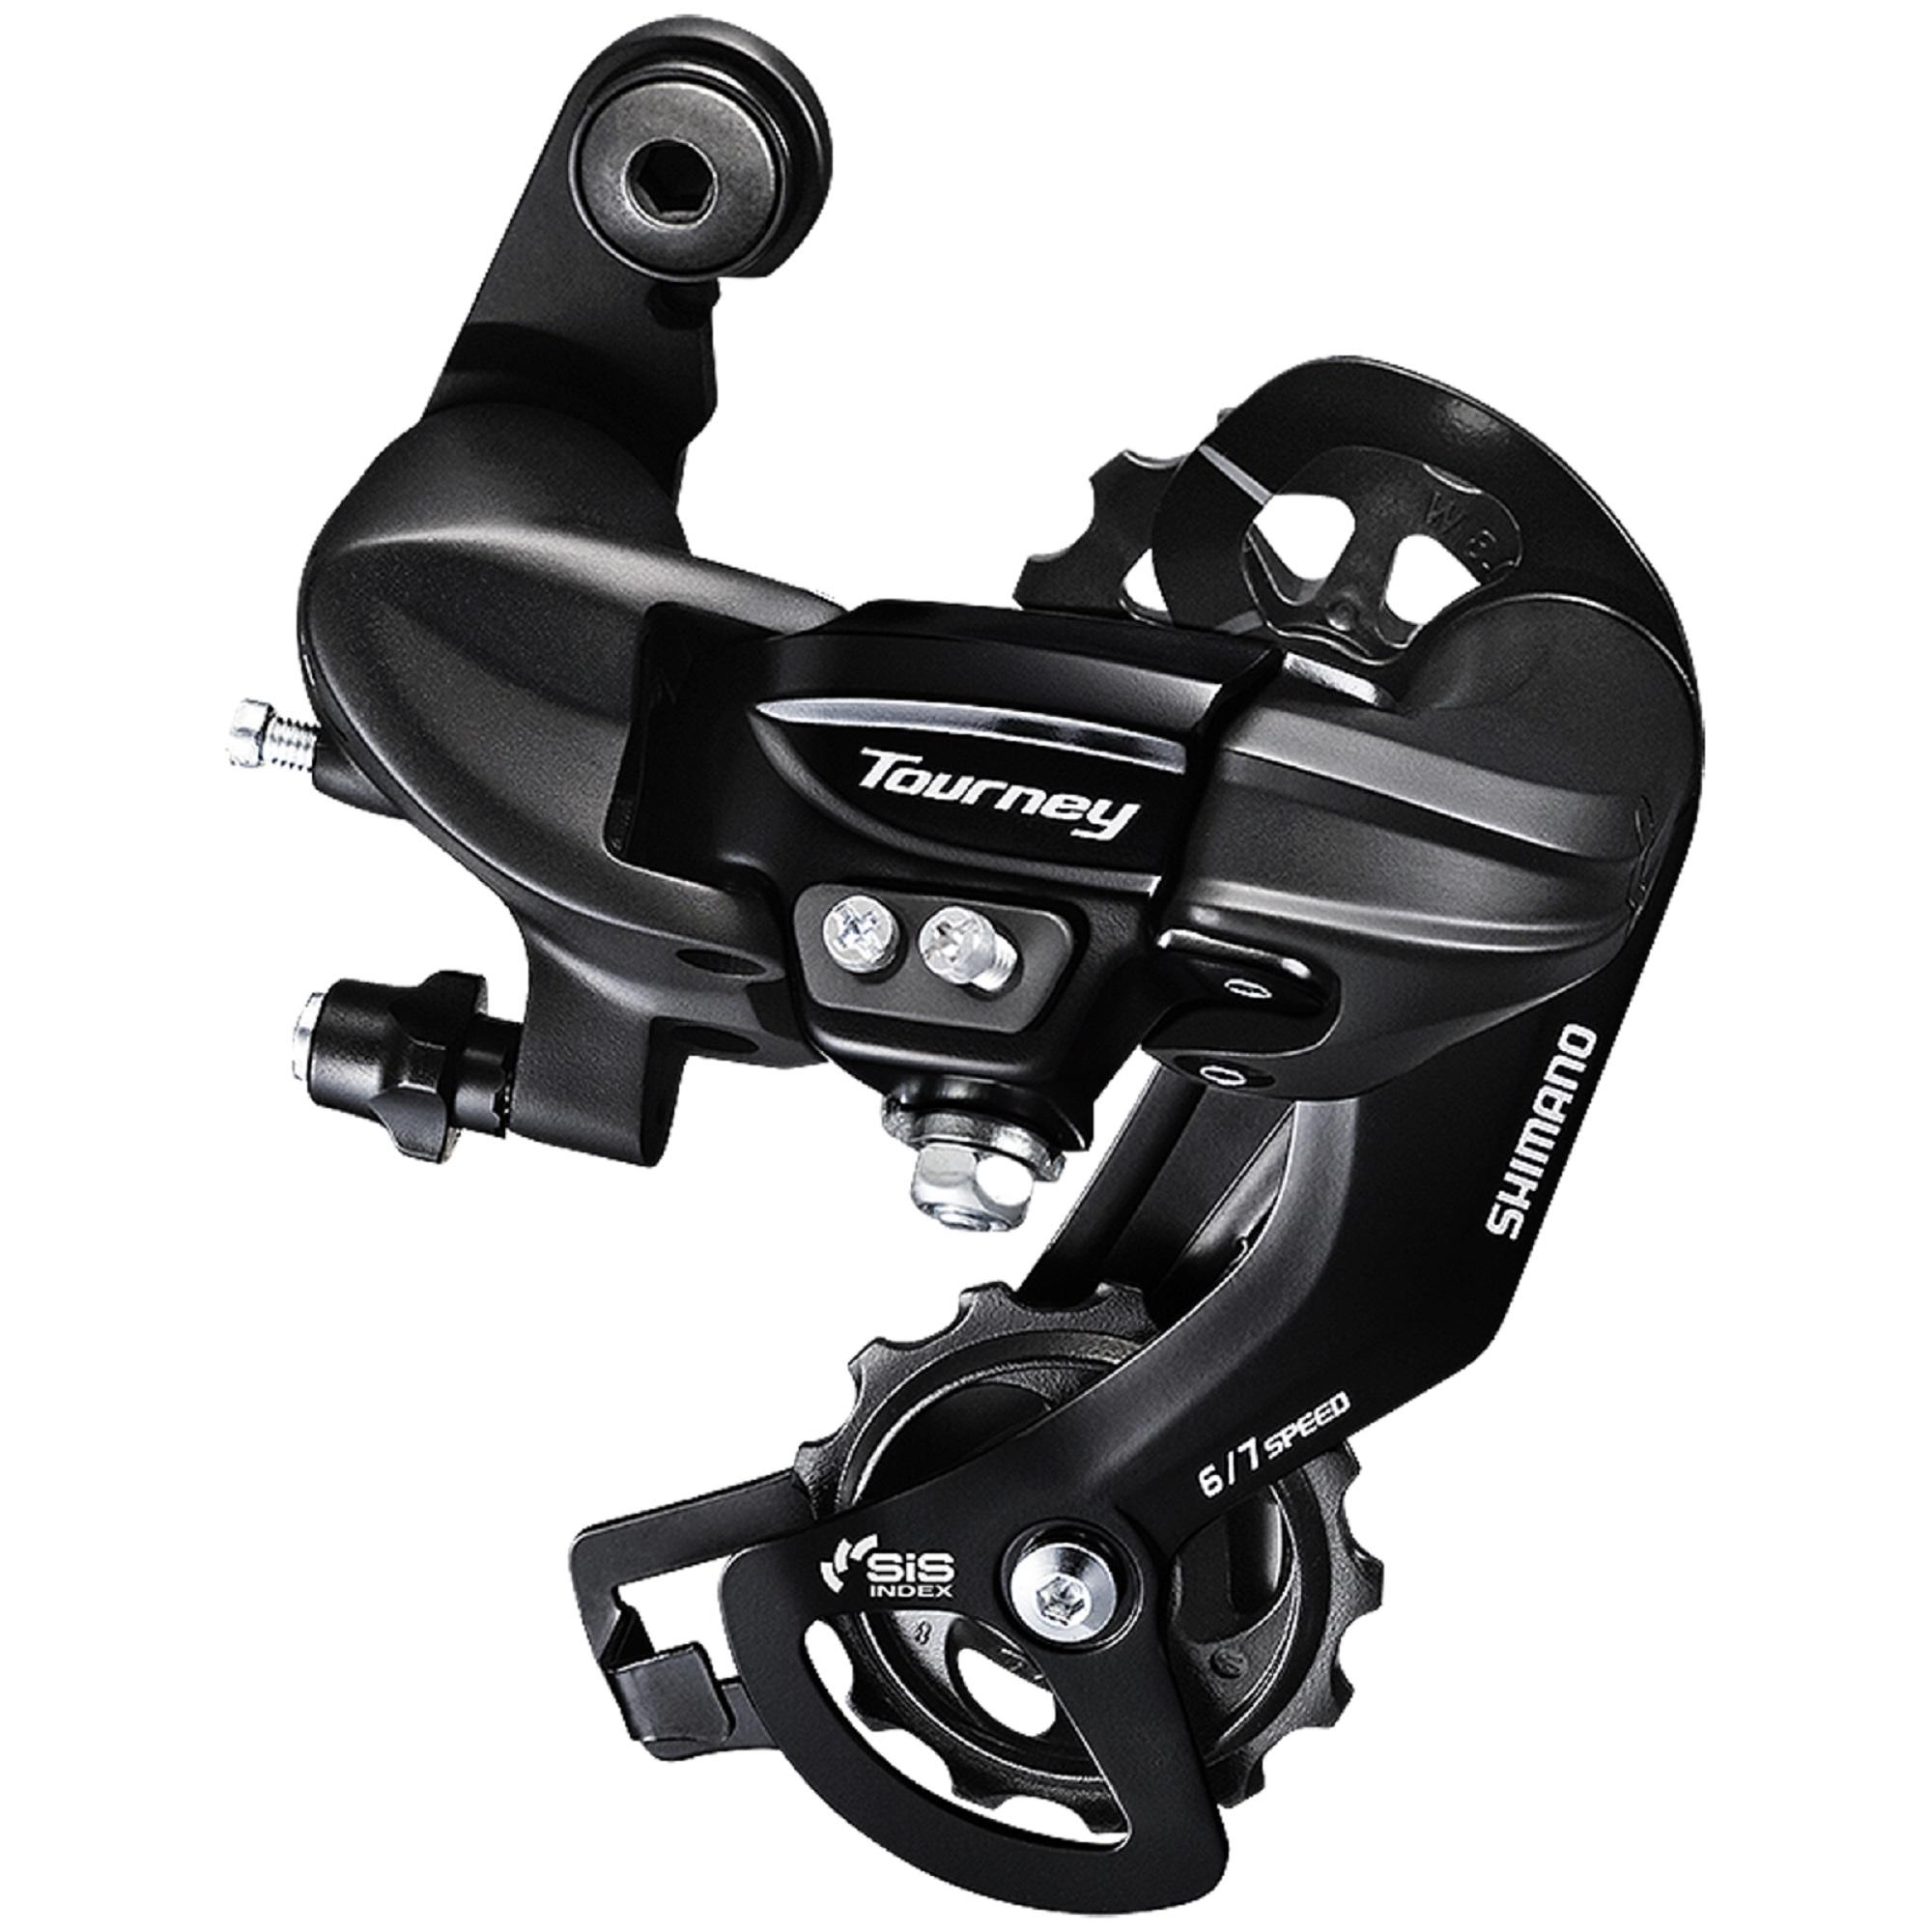 shimano 7 speed shifter and derailleur